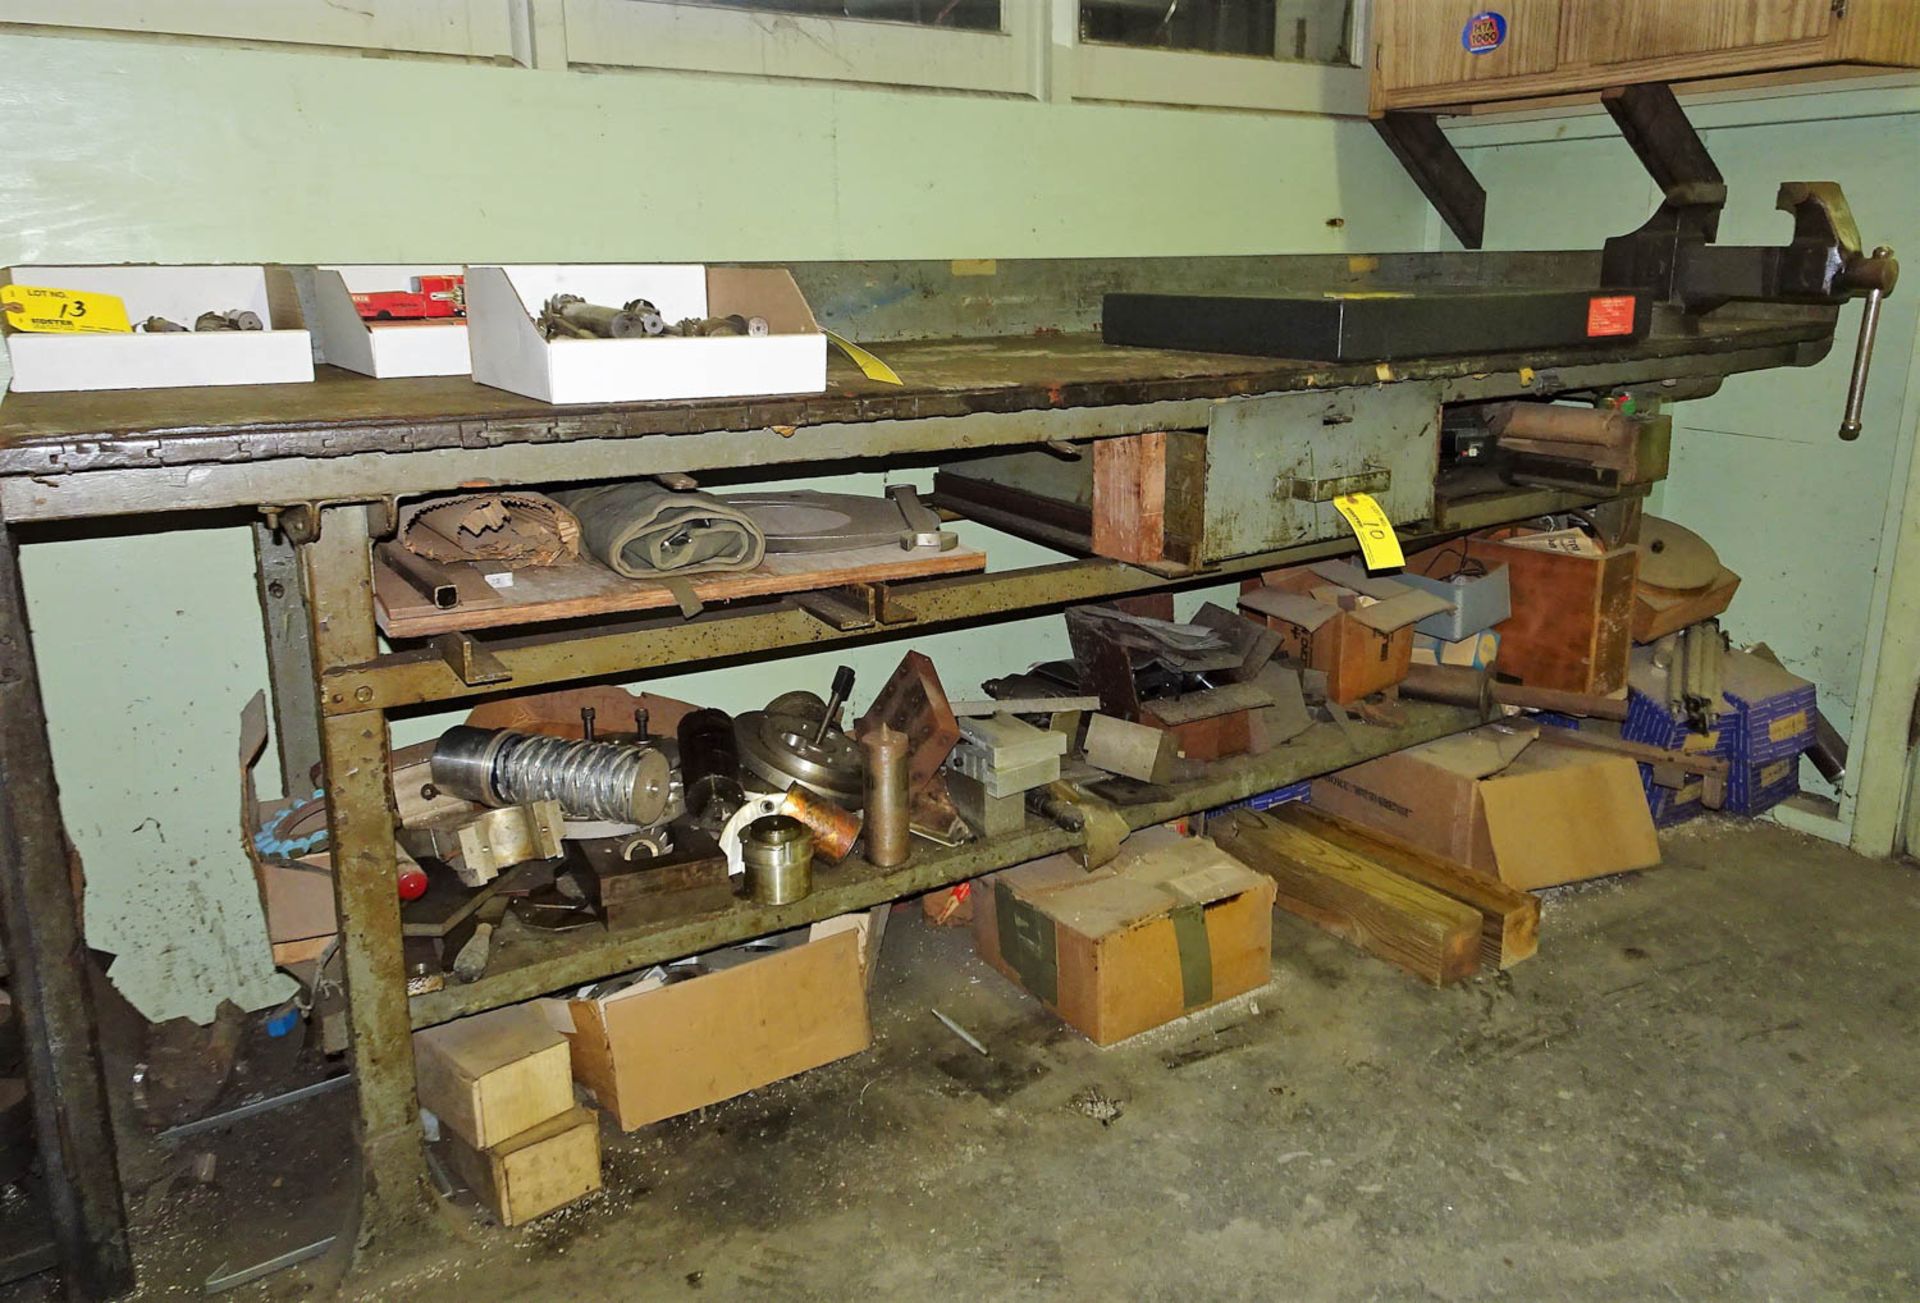 STEEL LEGGED WORK BENCH WITH CONTENTS, INCLUDING: 3" BENCH TOP MACHINIST VISE, SCRAP ALUMINUM, SCRAP